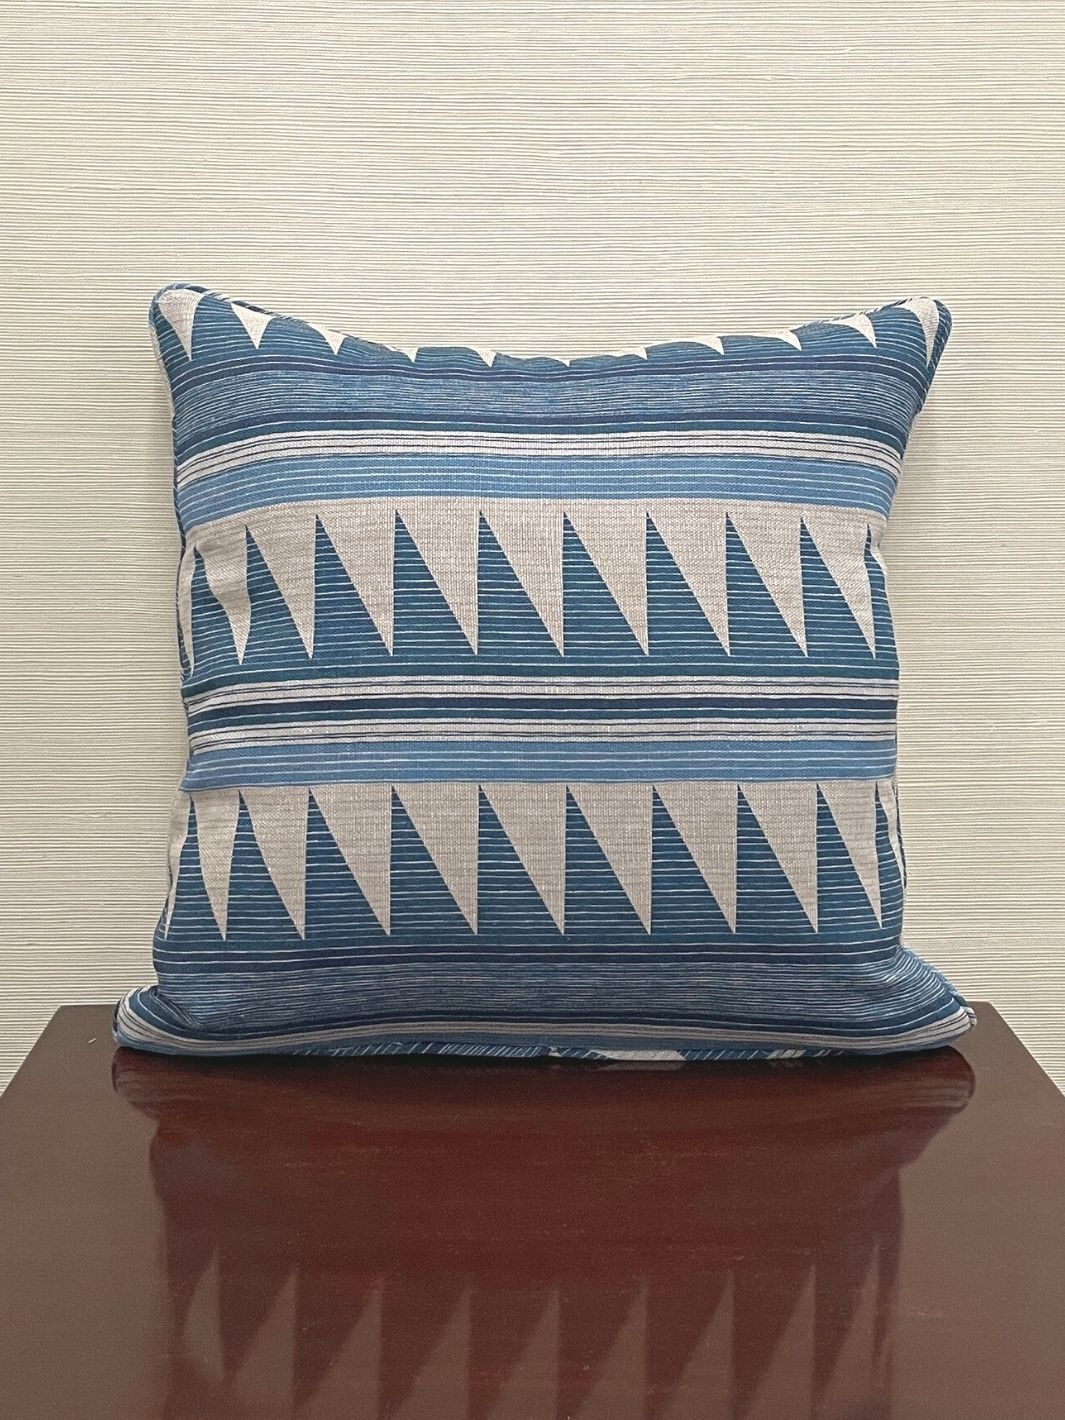 'Edwin Stripe' Throw Pillow by Nathan Turner 18x18 - Blue on Flax Linen